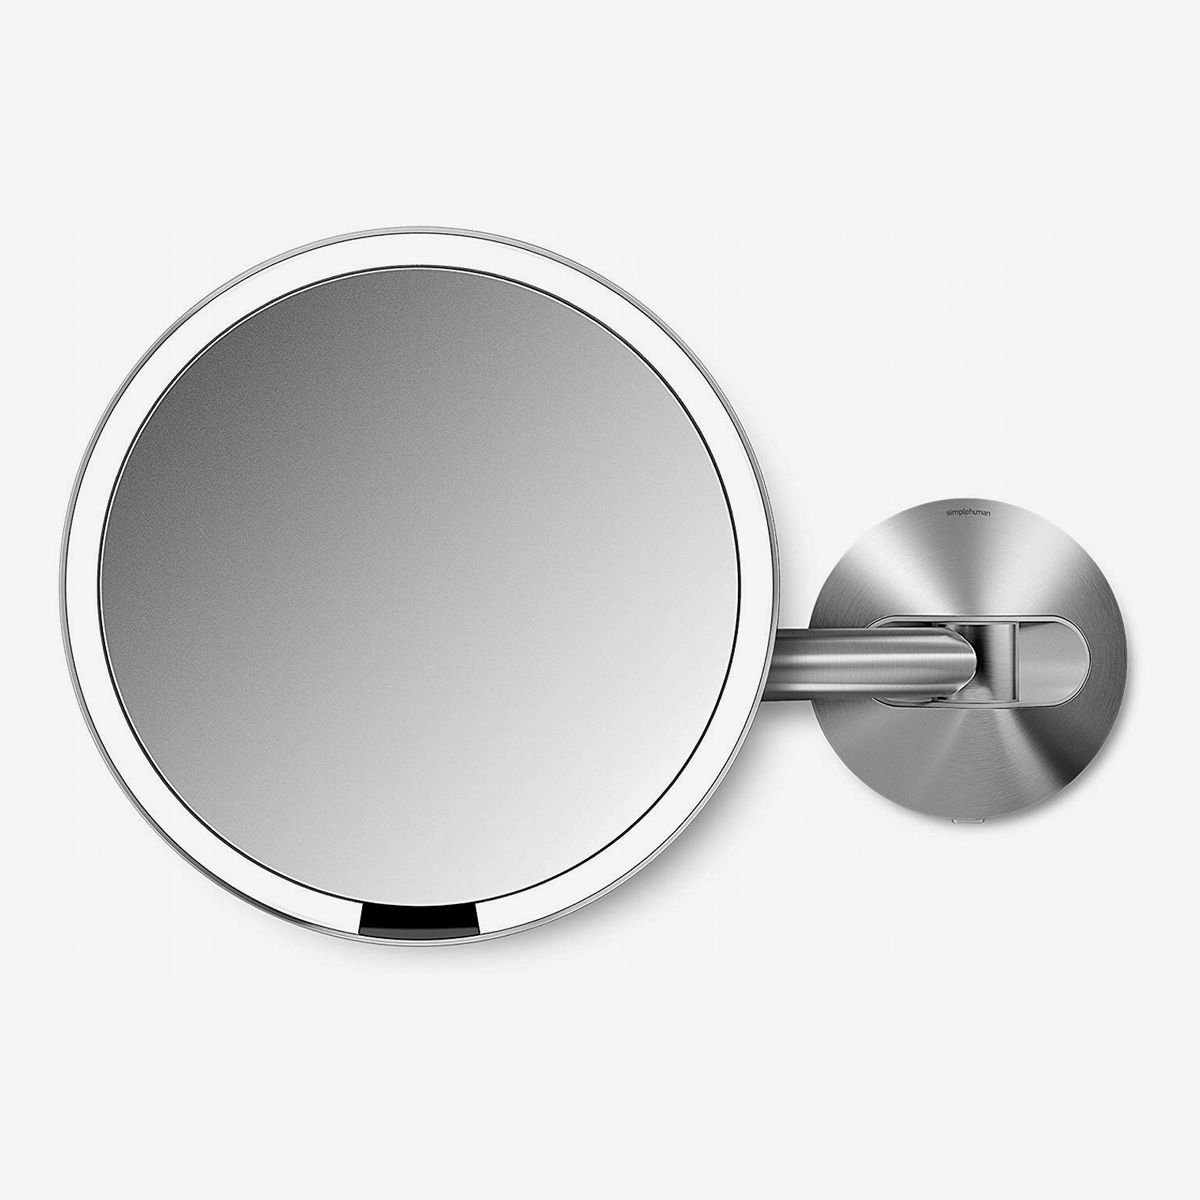 14 Best Lighted Makeup Mirrors 2021, Wall Mounted Lighted Makeup Mirror Black